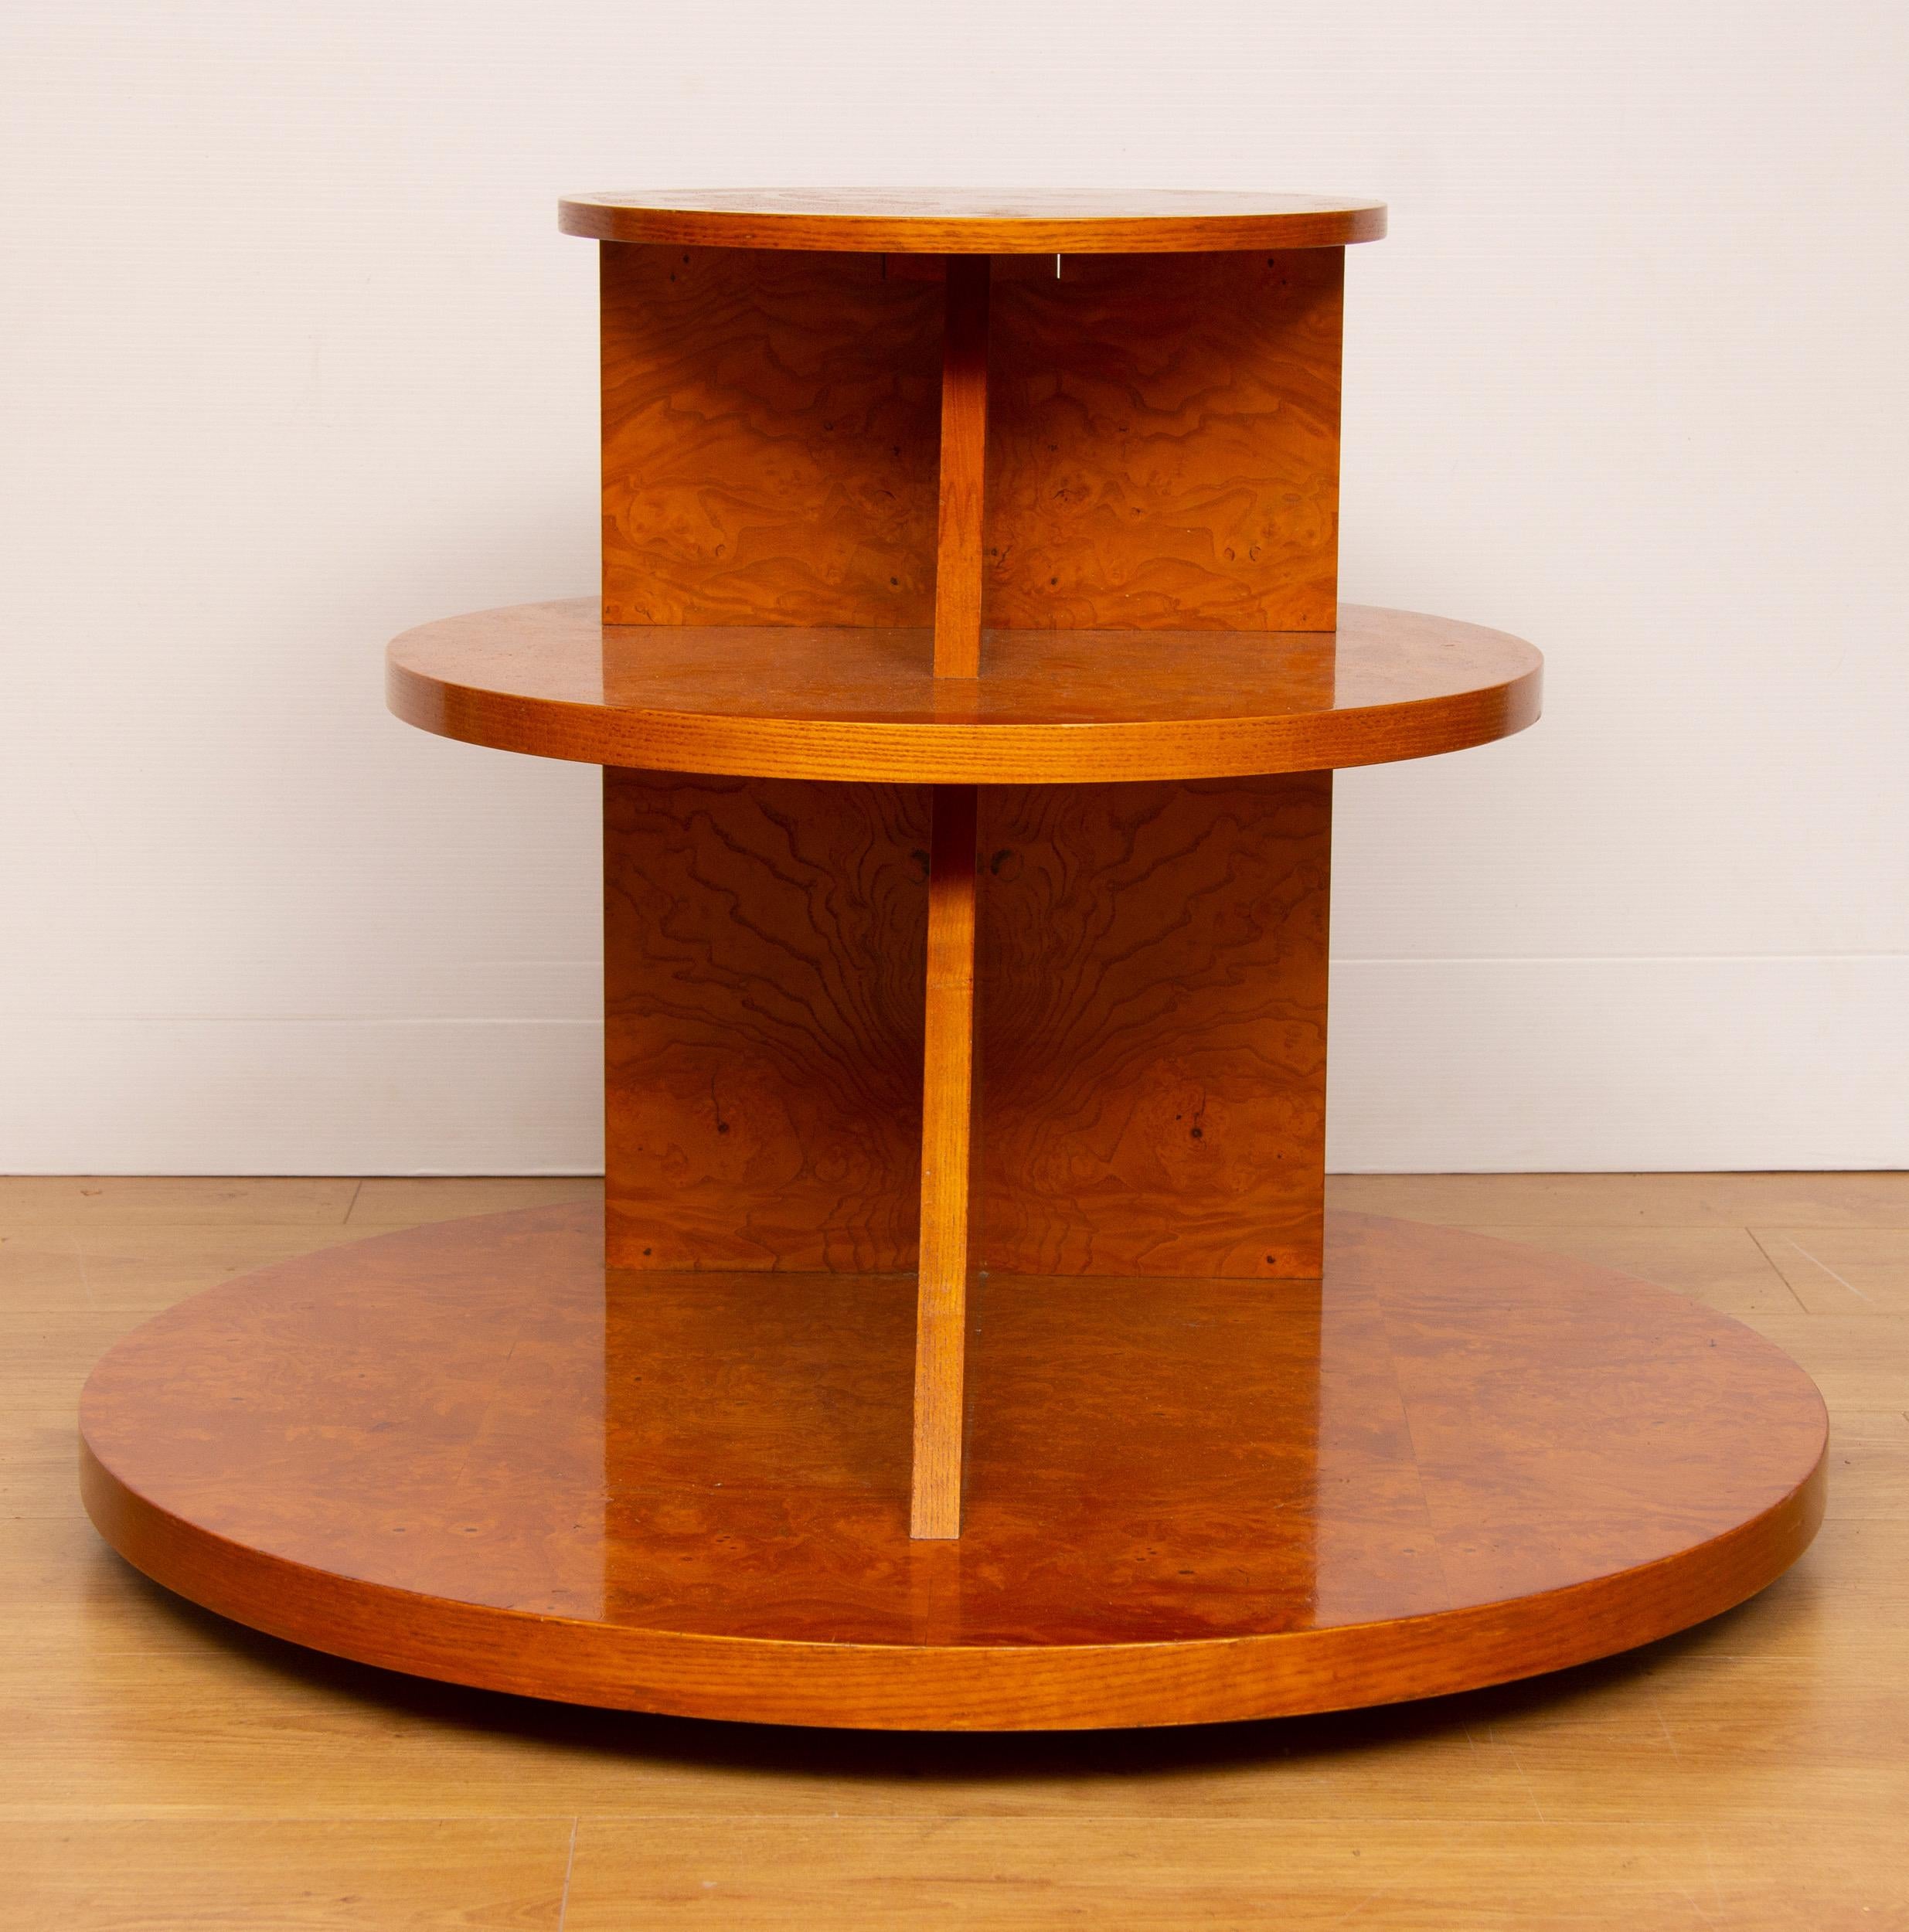 Art Deco 3-tier table in a beautiful burr elm.
3 graduated disks with flat dental column supported with a further triangular column giving the table 3 tiers with sectioned display areas.
Designed by Hille
Measure: H 61 cm, W 84 cm, D 84